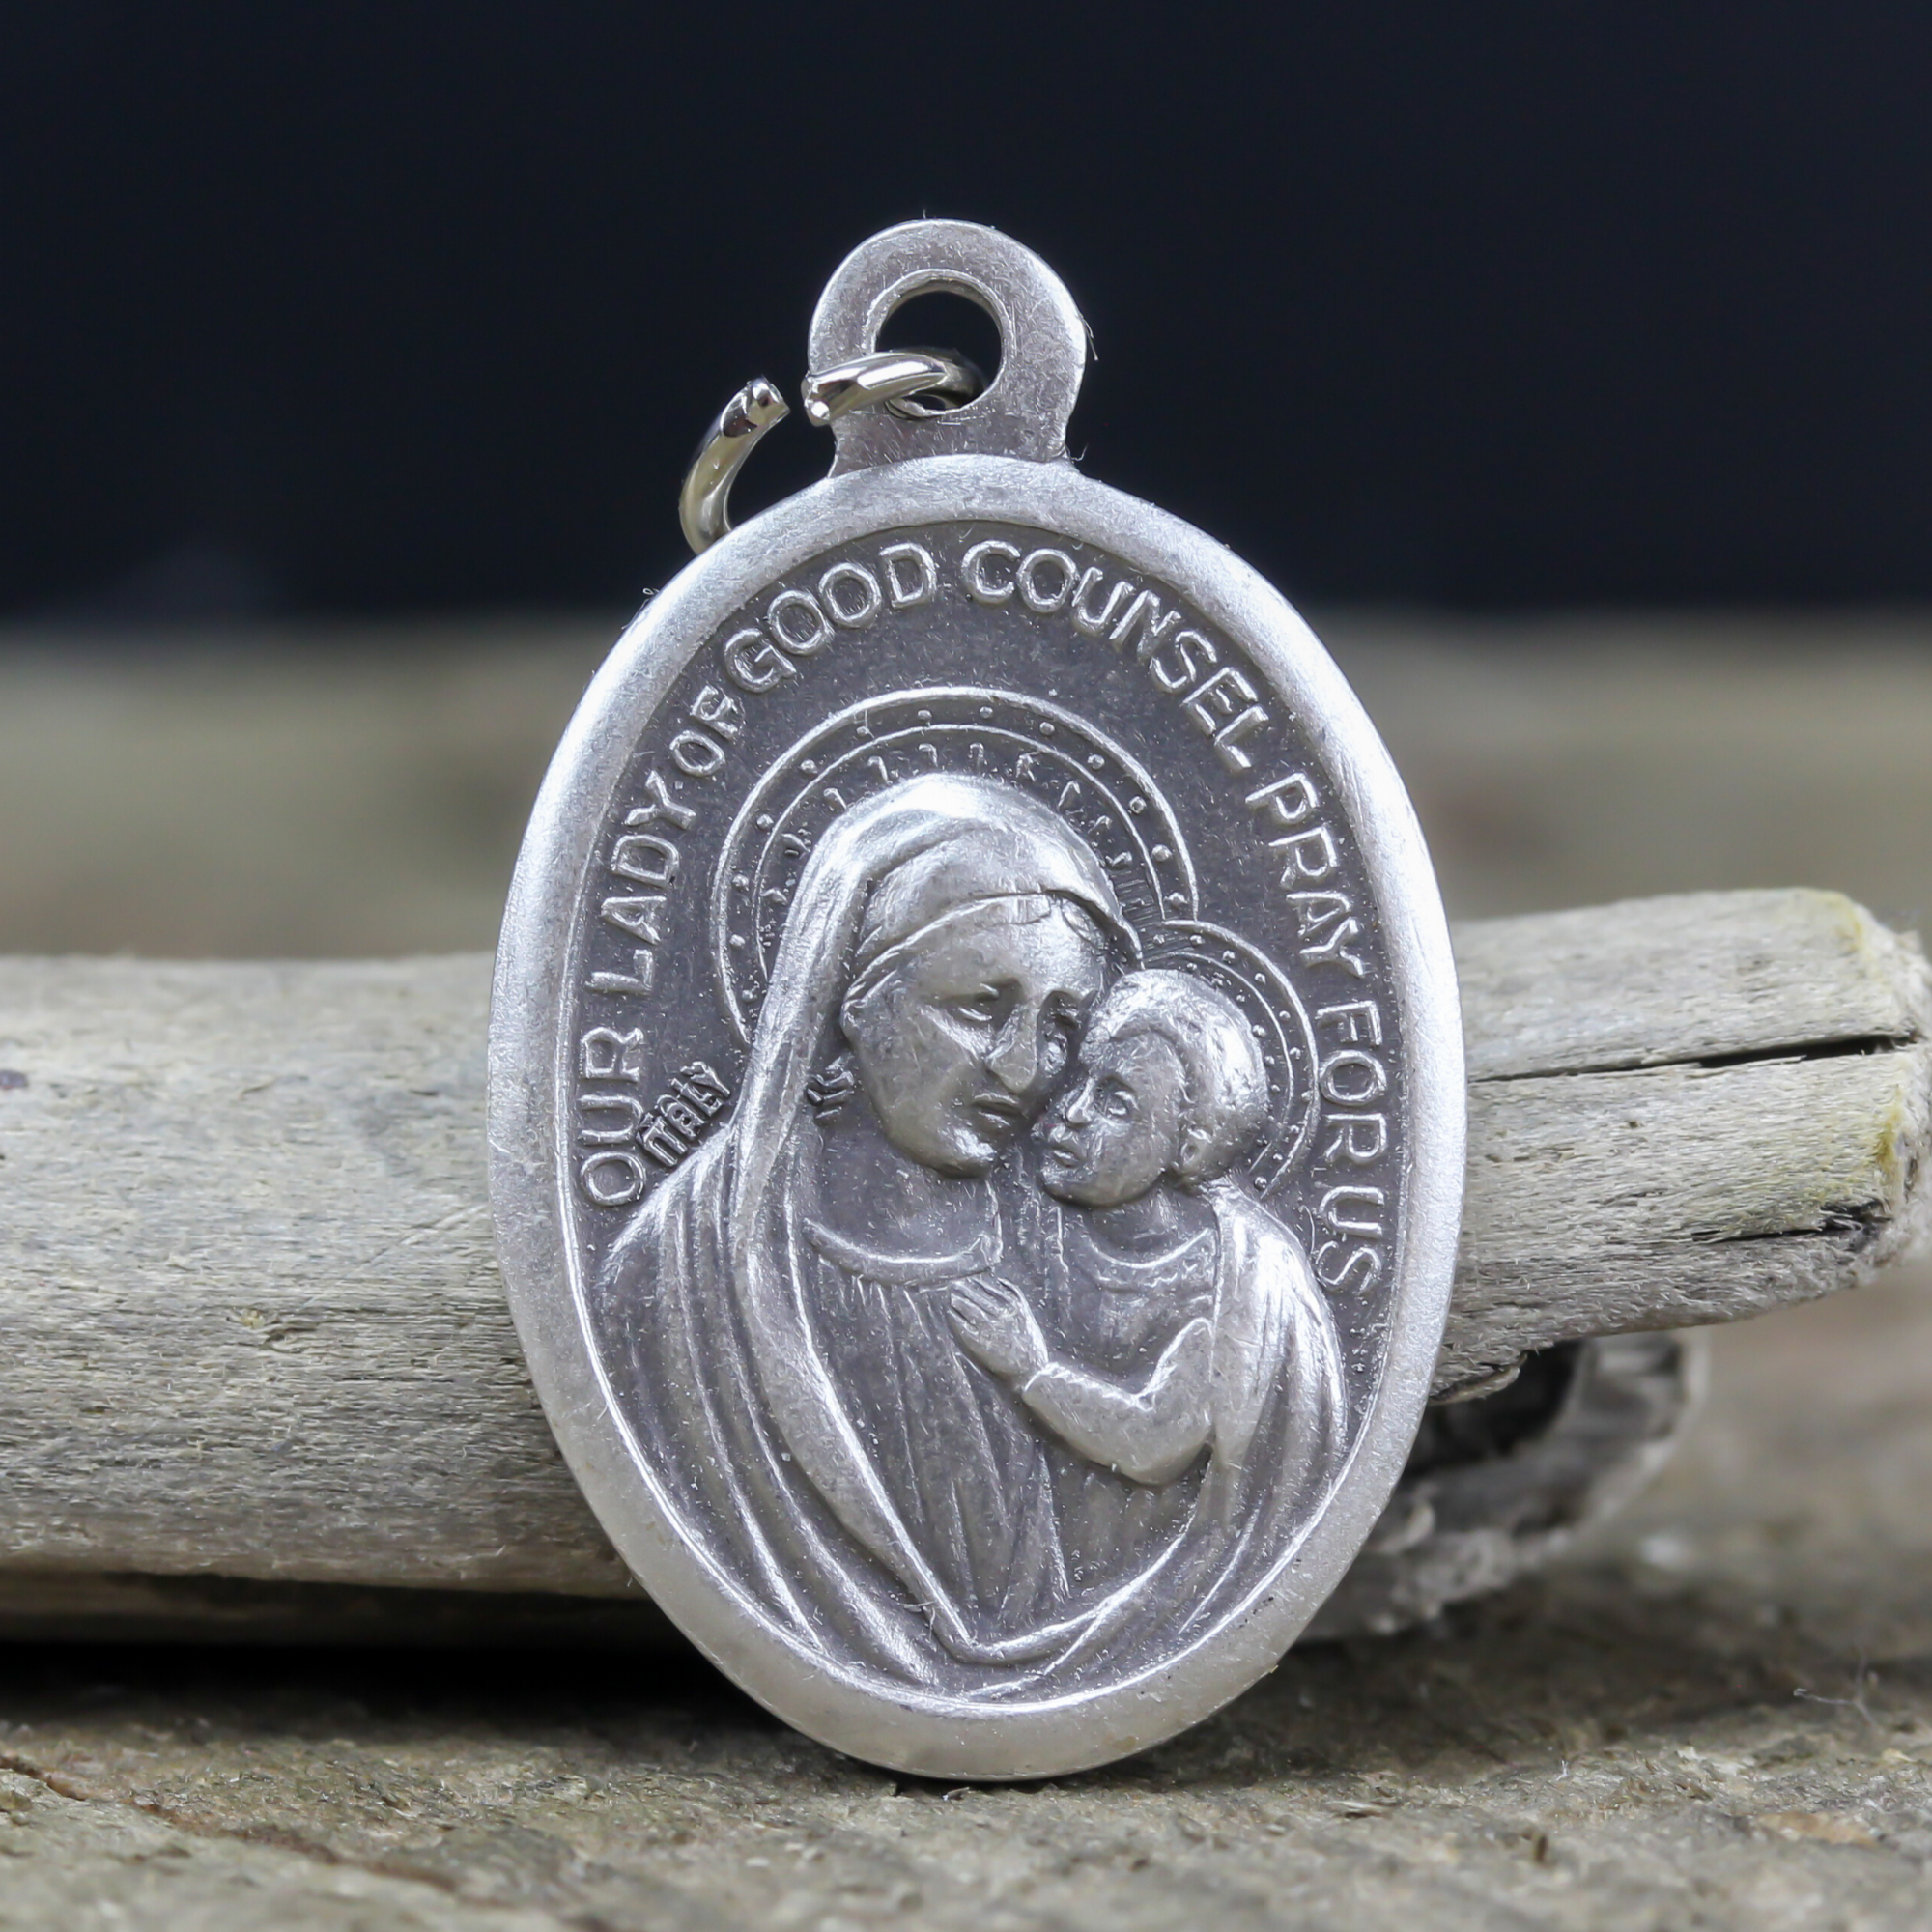 Our Lady of Good Counsel one inch oval medal